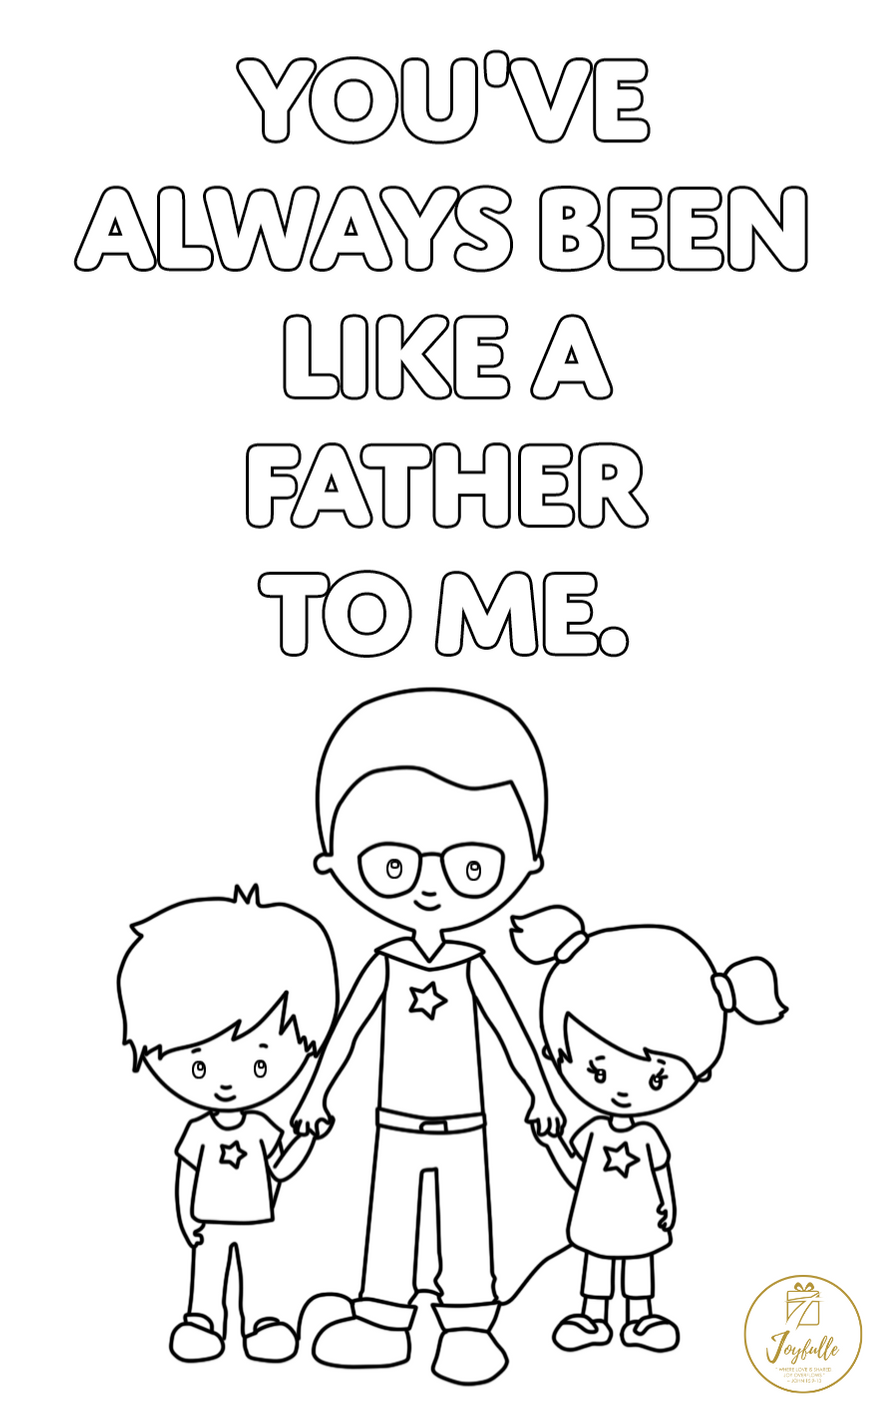 Father's Day Greeting Card 03